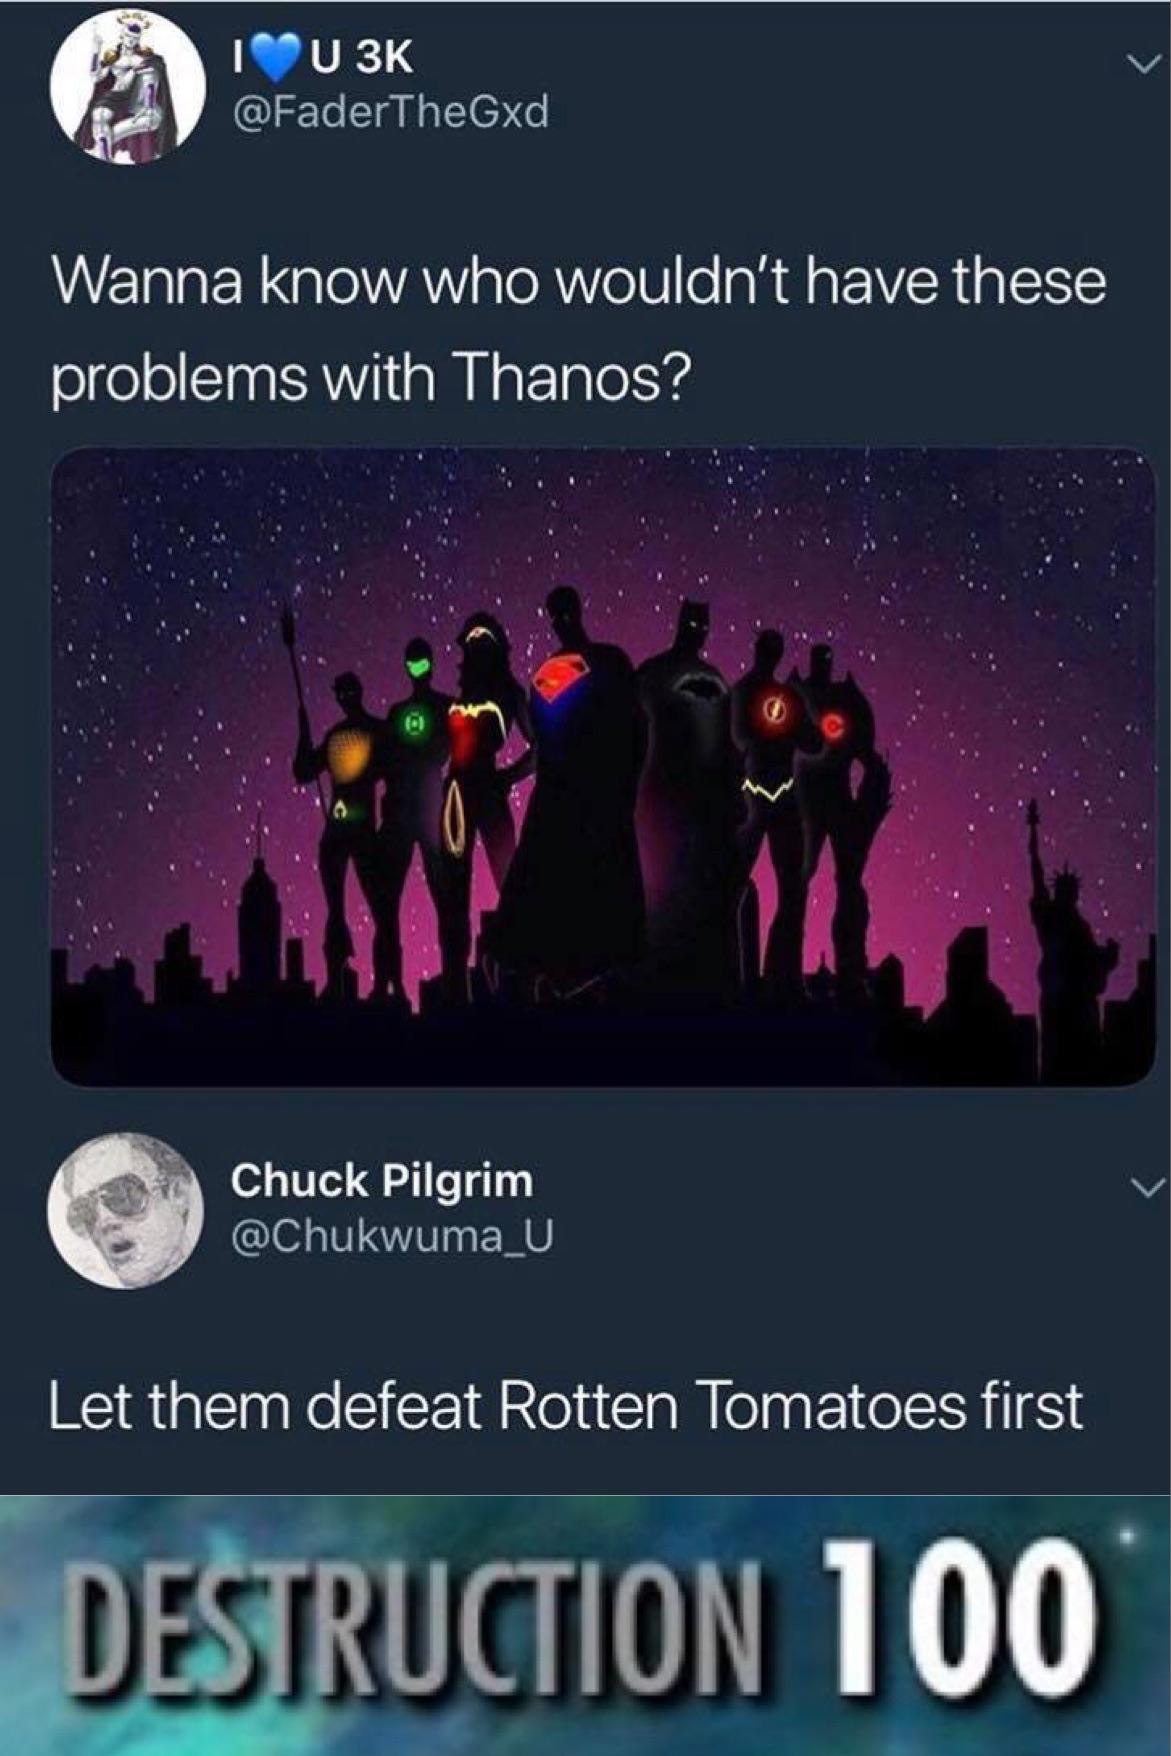 rotten tomatoes memes - I U3K Wanna know who wouldn't have these problems with Thanos? Chuck Pilgrim Let them defeat Rotten Tomatoes first Destruction 100